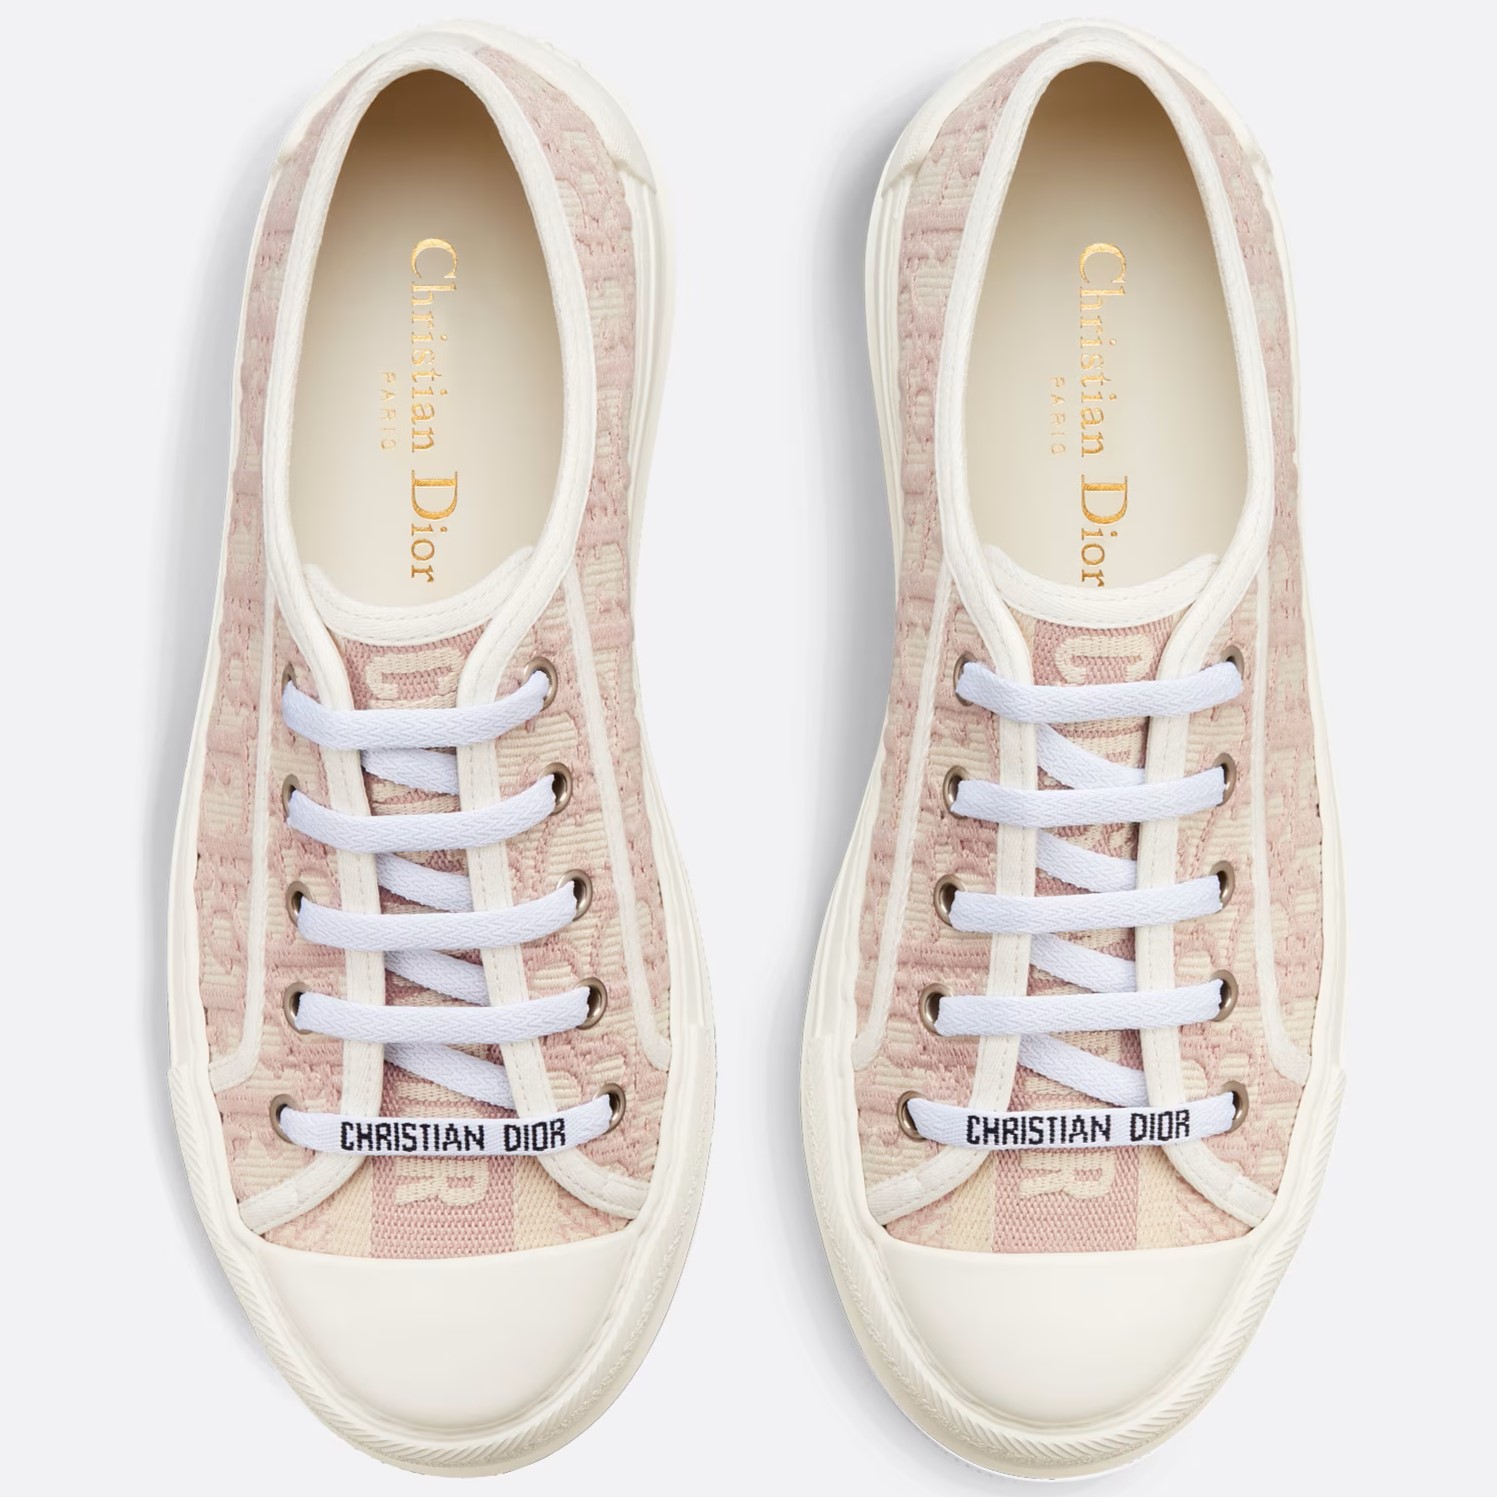 GIÀY THỂ THAO NỮ WALK N DIOR PLATFORM SNEAKER IN NUDE DIOR OBLIQUE EMBROIDERED COTTON 7